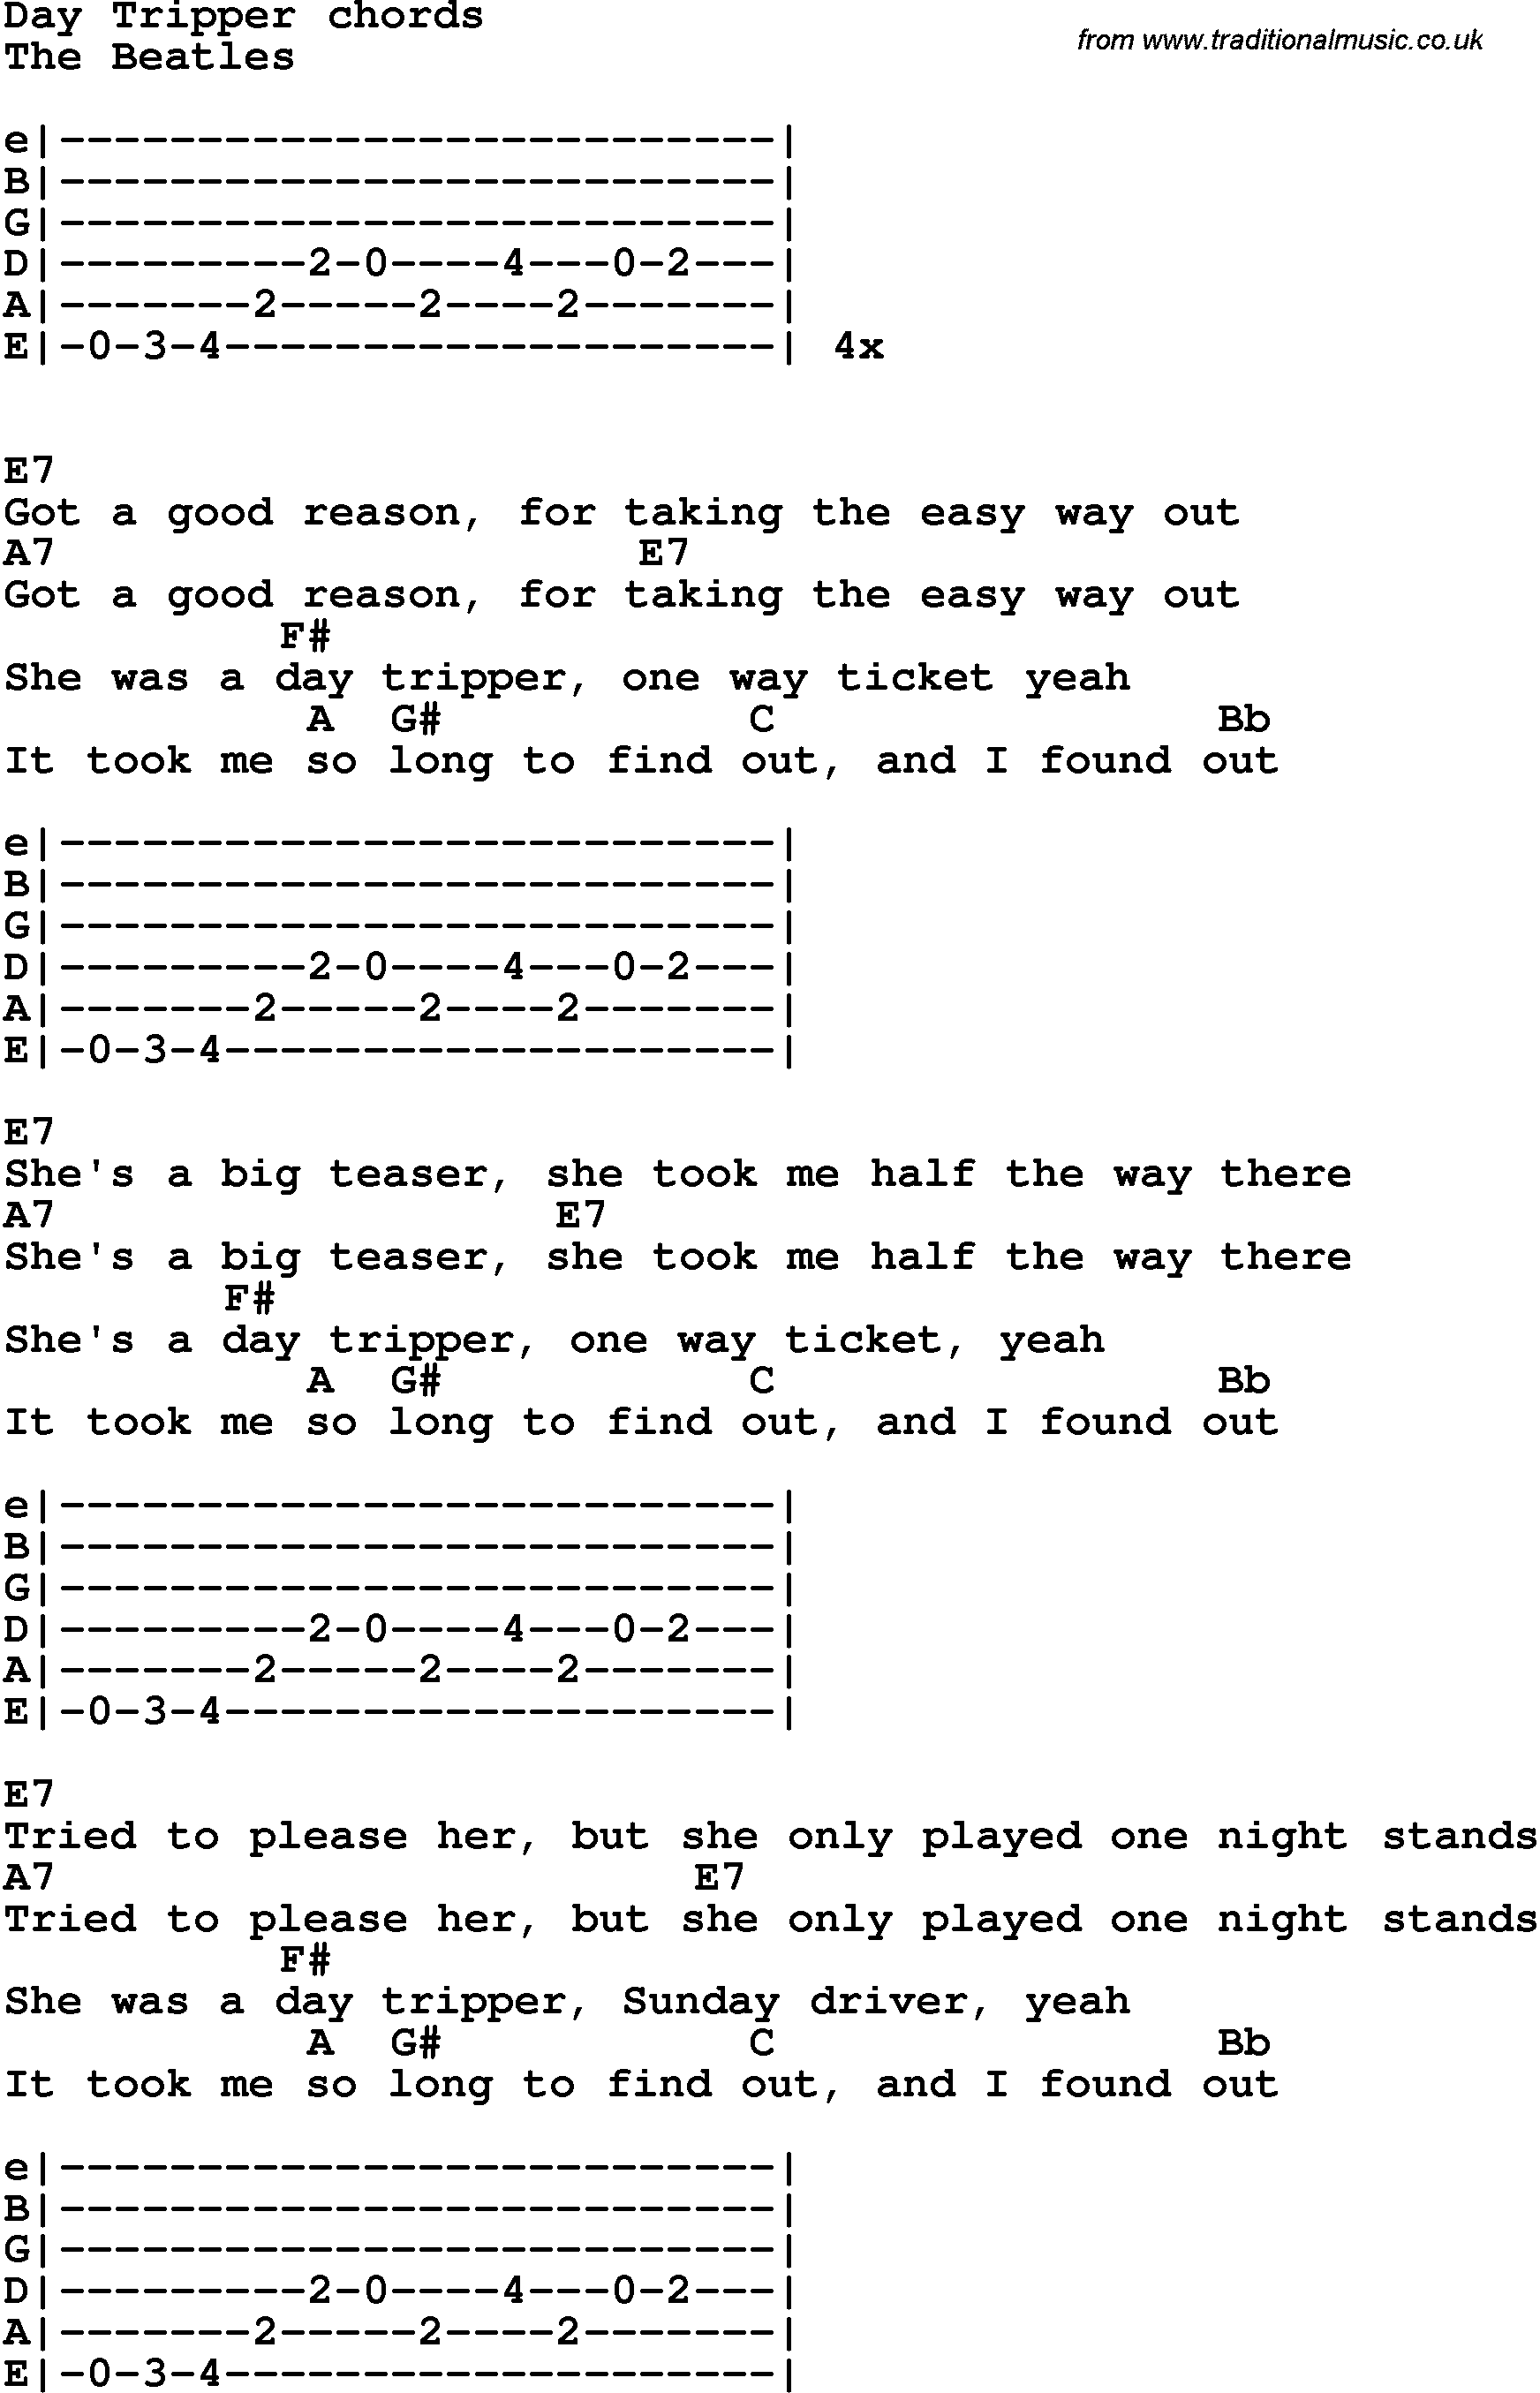 Song Lyrics with guitar chords for Day Tripper